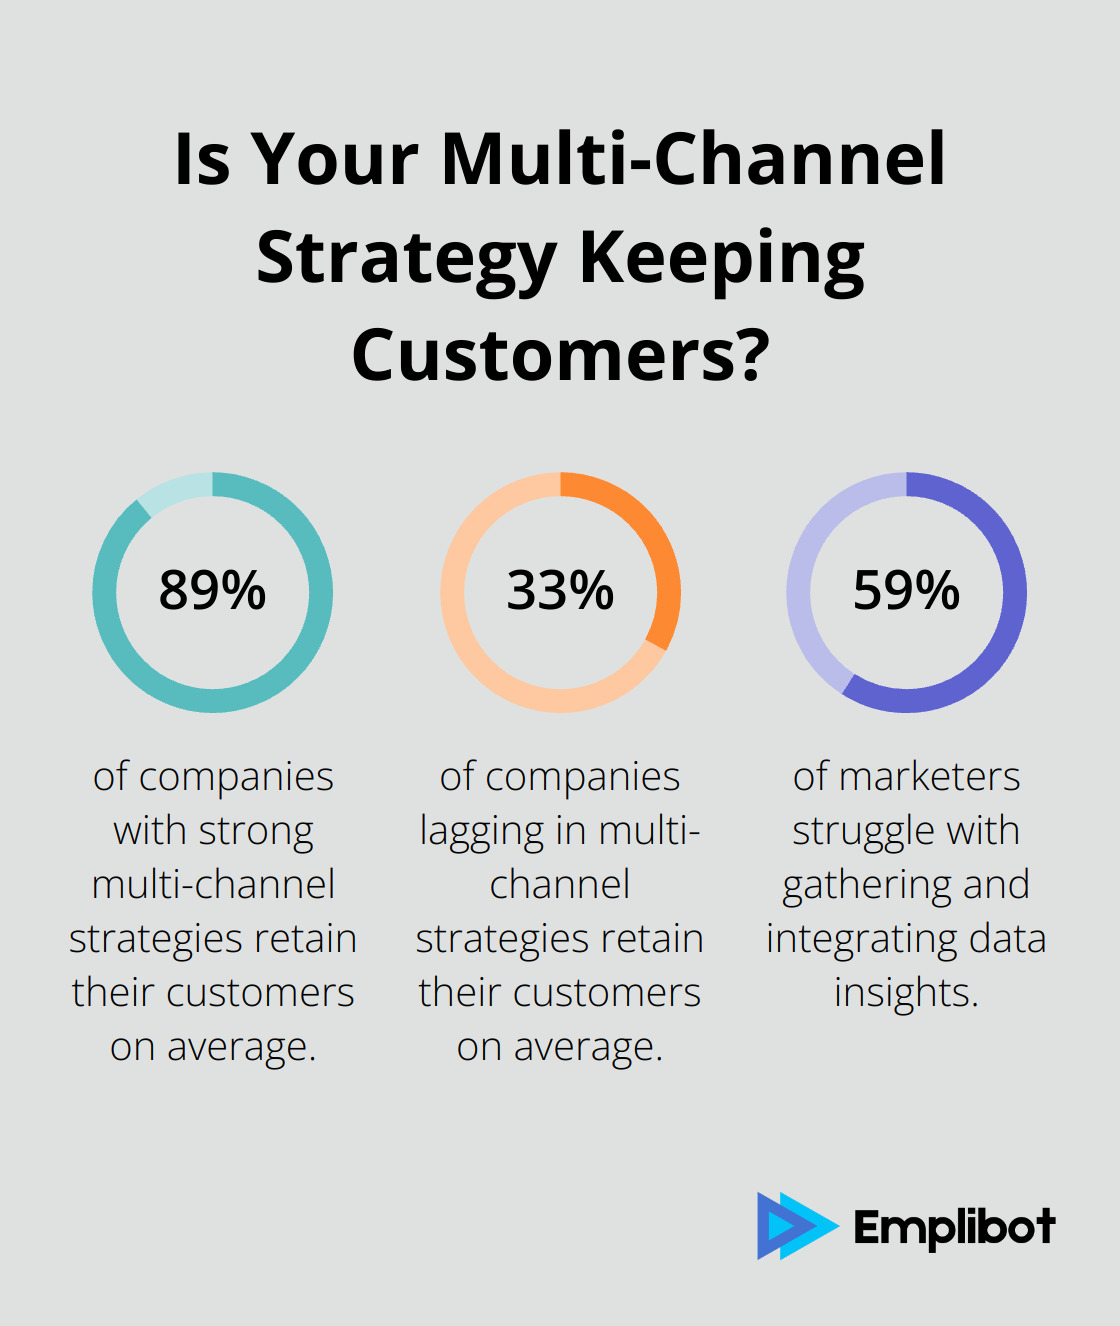 Fact - Is Your Multi-Channel Strategy Keeping Customers?